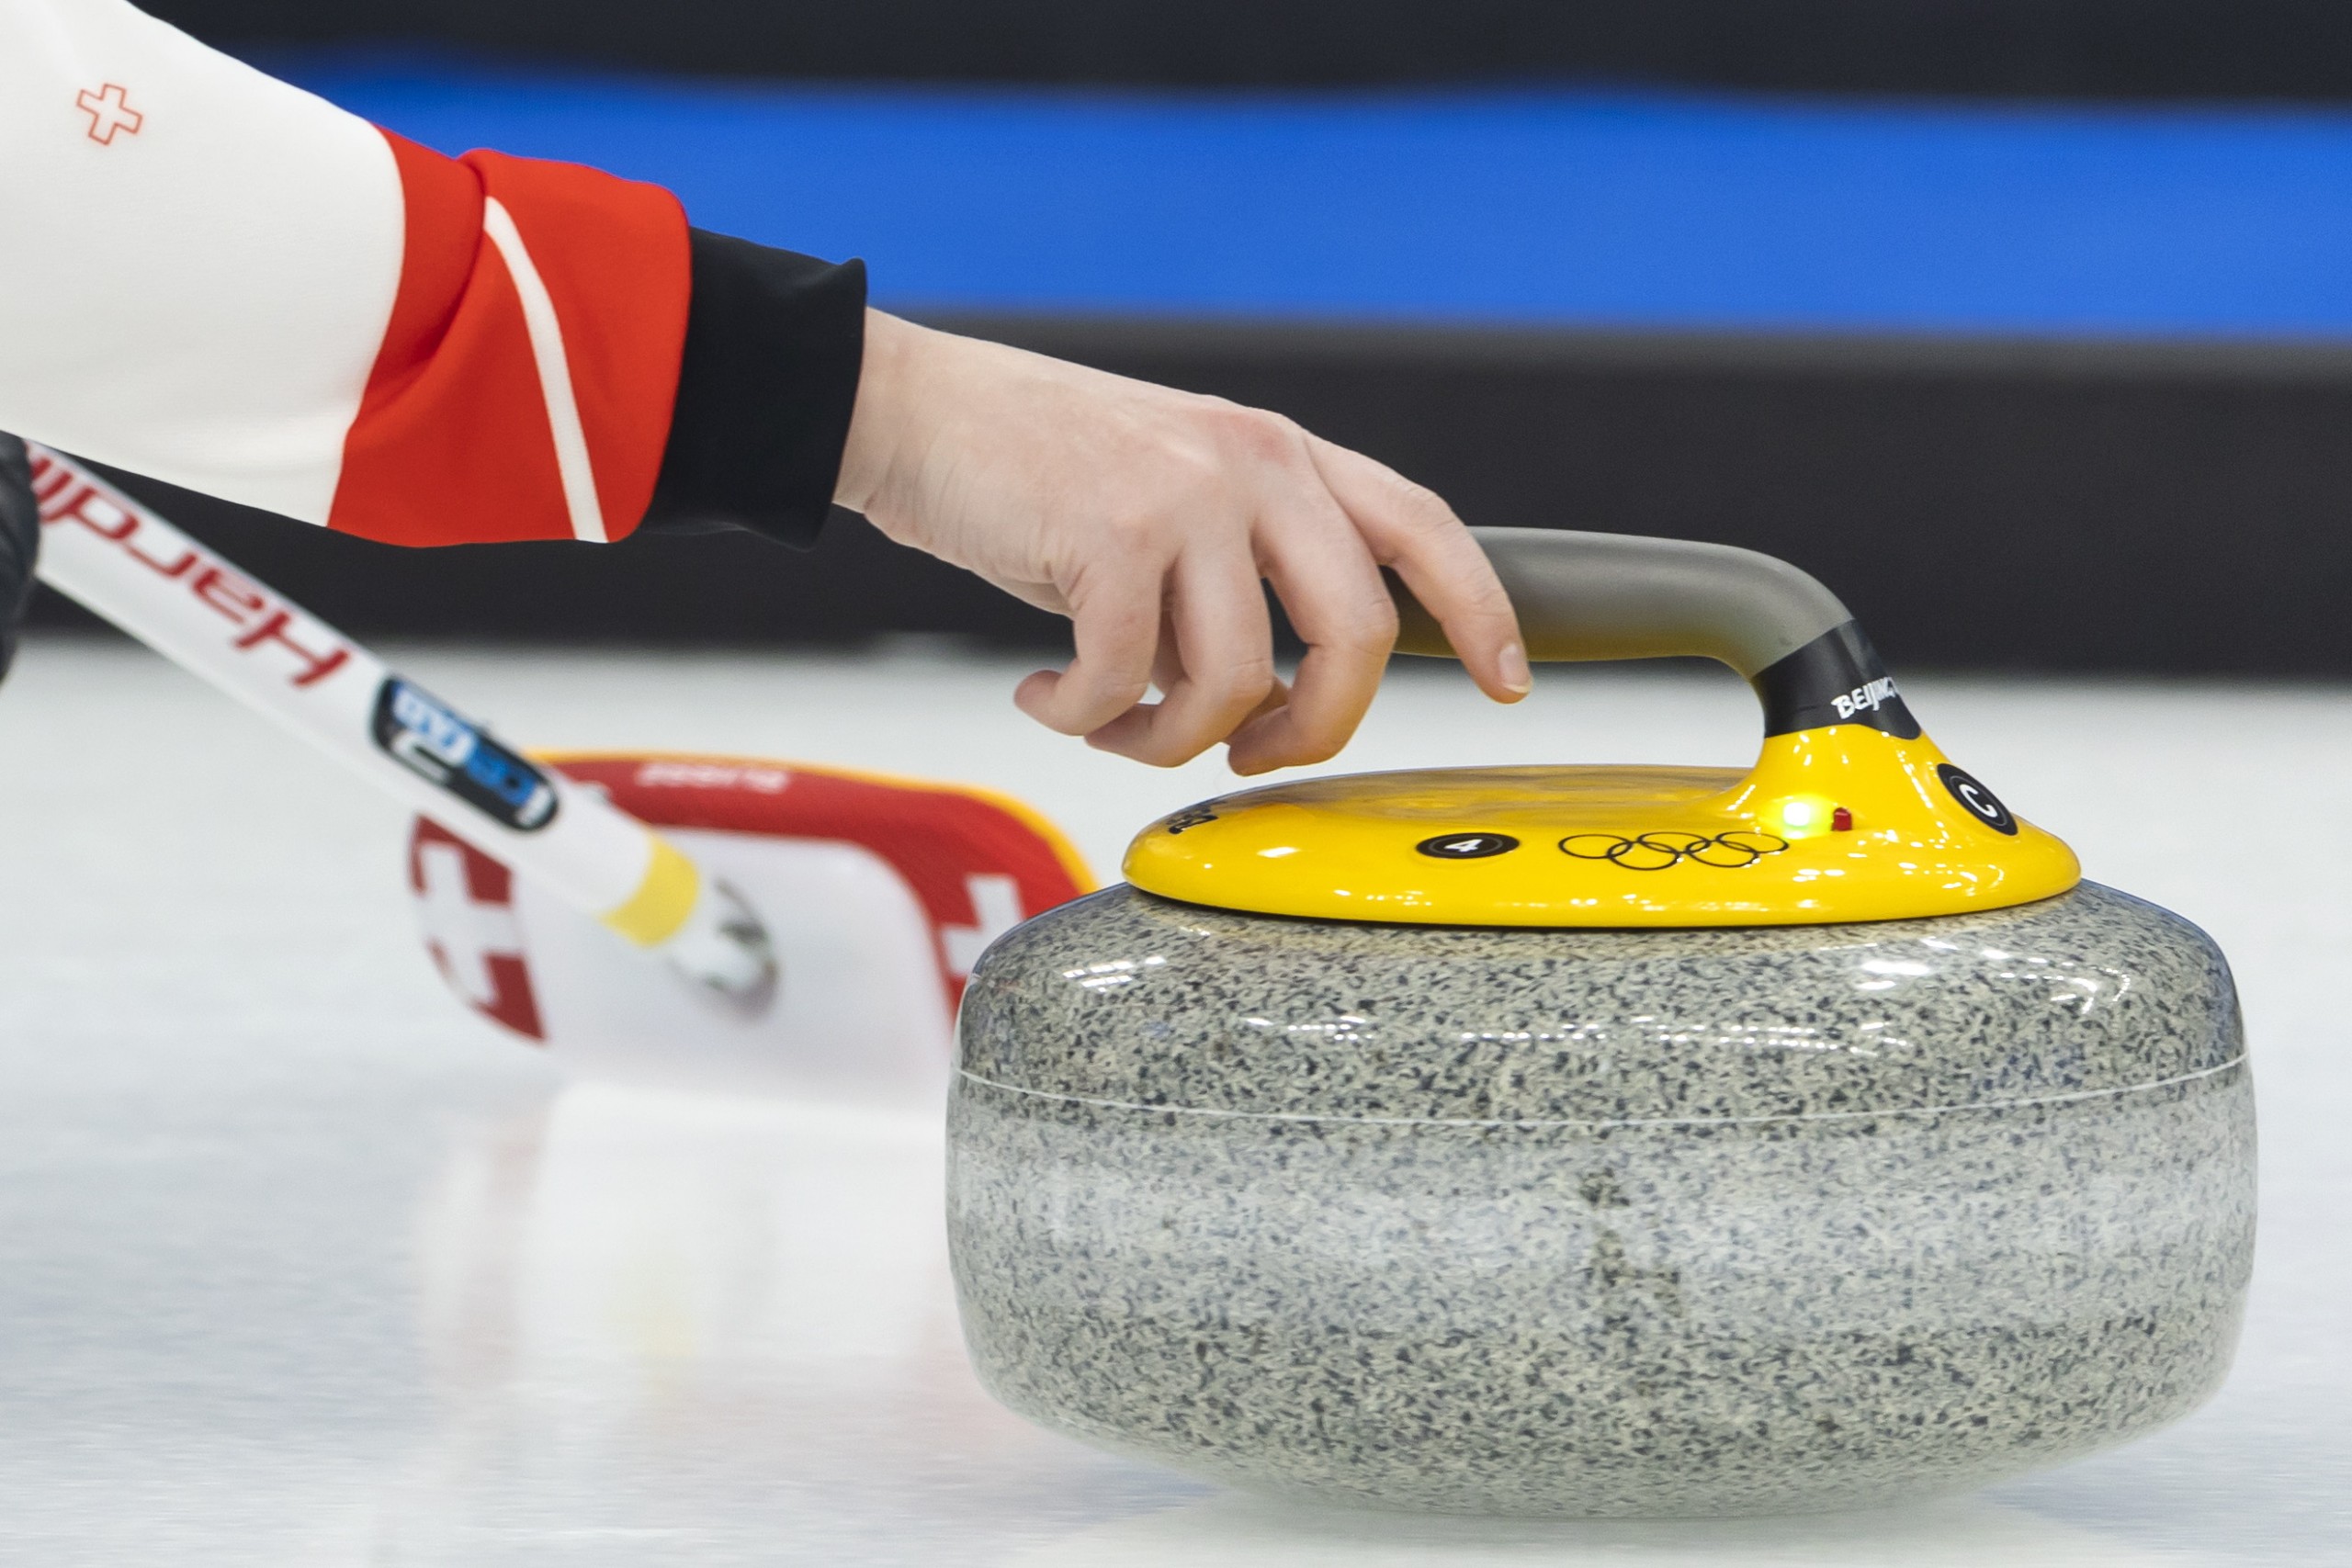 epa09730131 Jenny Perret of Switzerland releases her stone during the Curling mixed doubles preliminary round game between the Czech Republic and Switzerland at the Beijing 2022 Olympic Games in Beijing, China, 05 February 2022.  EPA/SALVATORE DI NOLFI